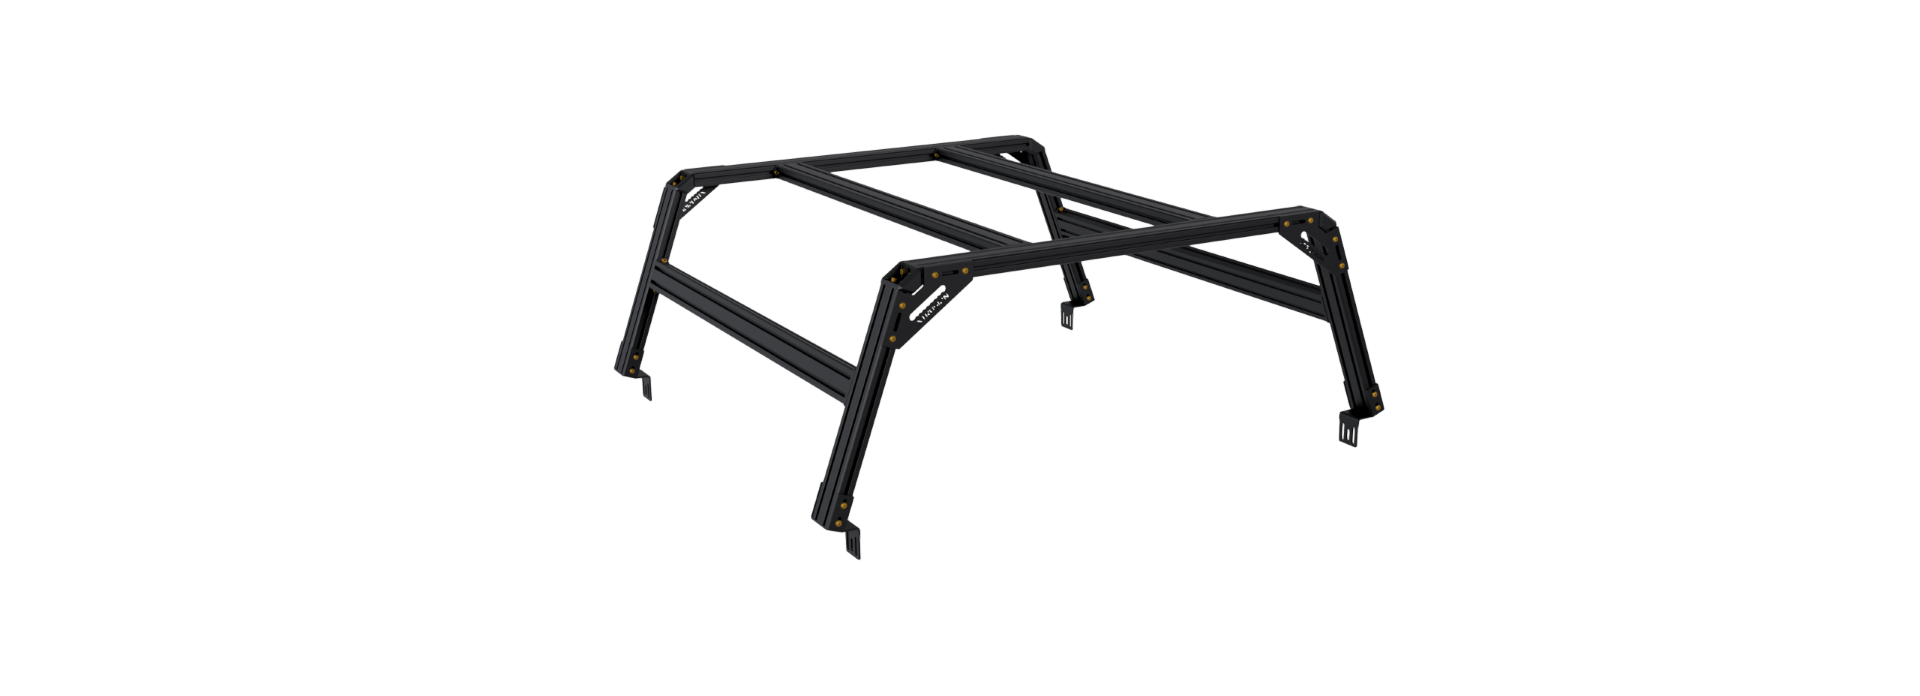 XTR1 Build-Your-Own Bed Rack - Ford F-150